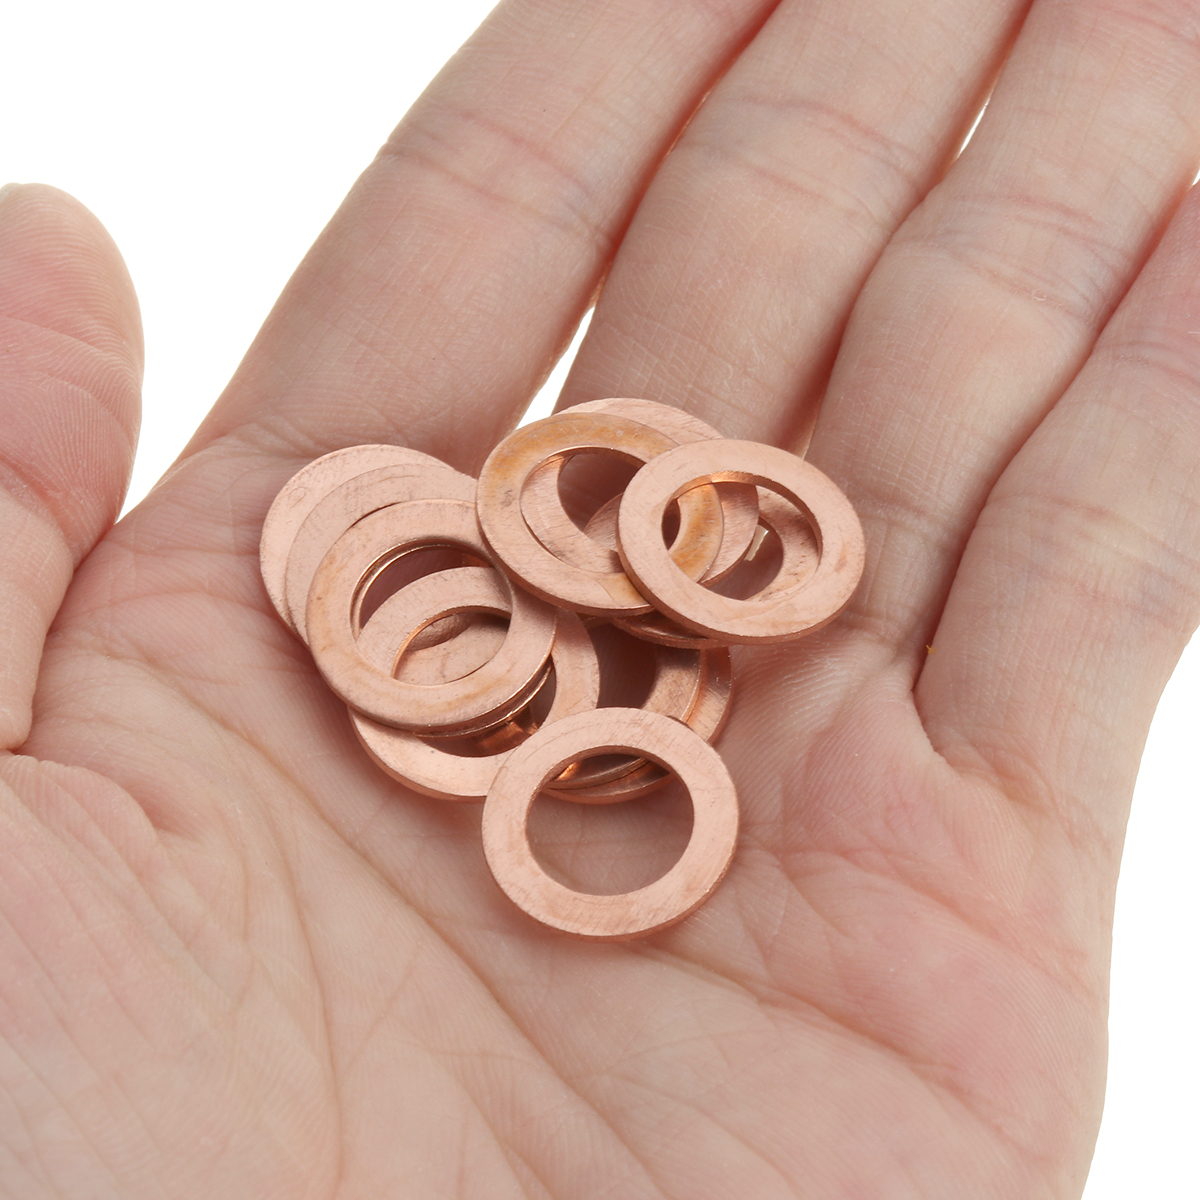 100Pcs-Assorted-Copper-Sealing-Solid-Gasket-Washer-Sump-Plug-Oil-For-Boat-Crush-Flat-Seal-Ring-Tool--1809755-9